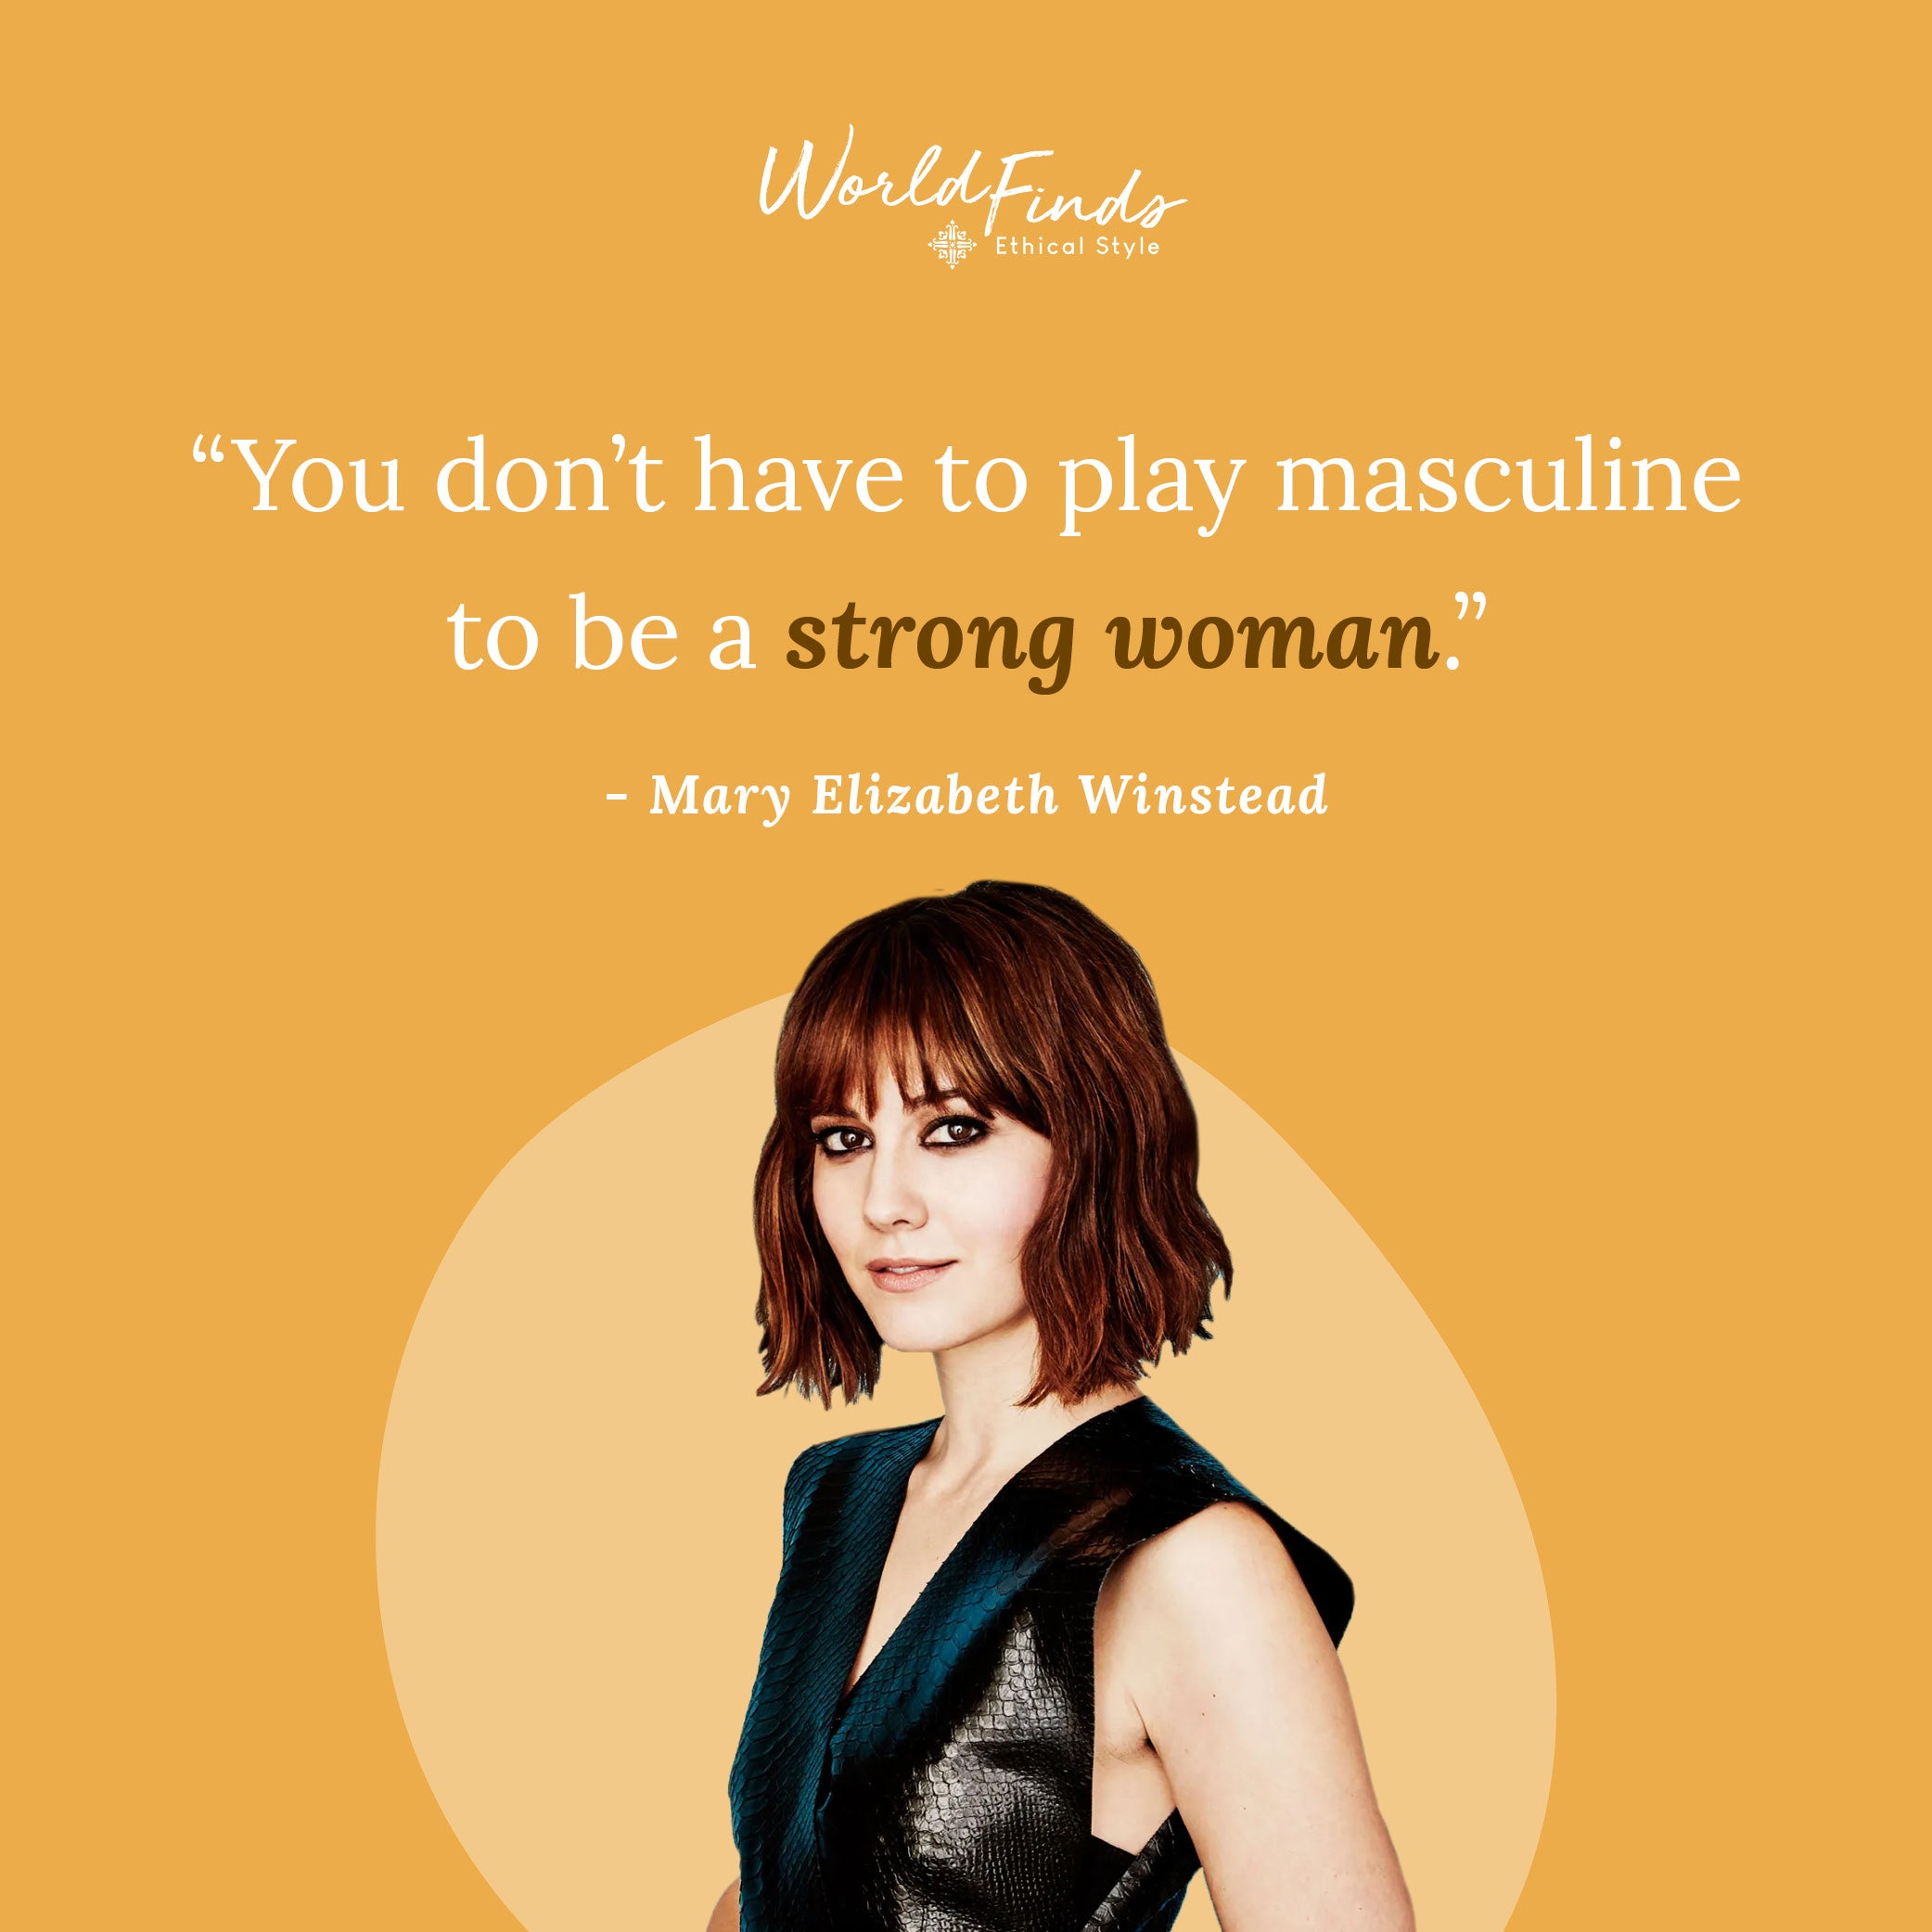 Quote from Mary Elizabeth Winstead, "You don't have to play masculine to be a strong woman."